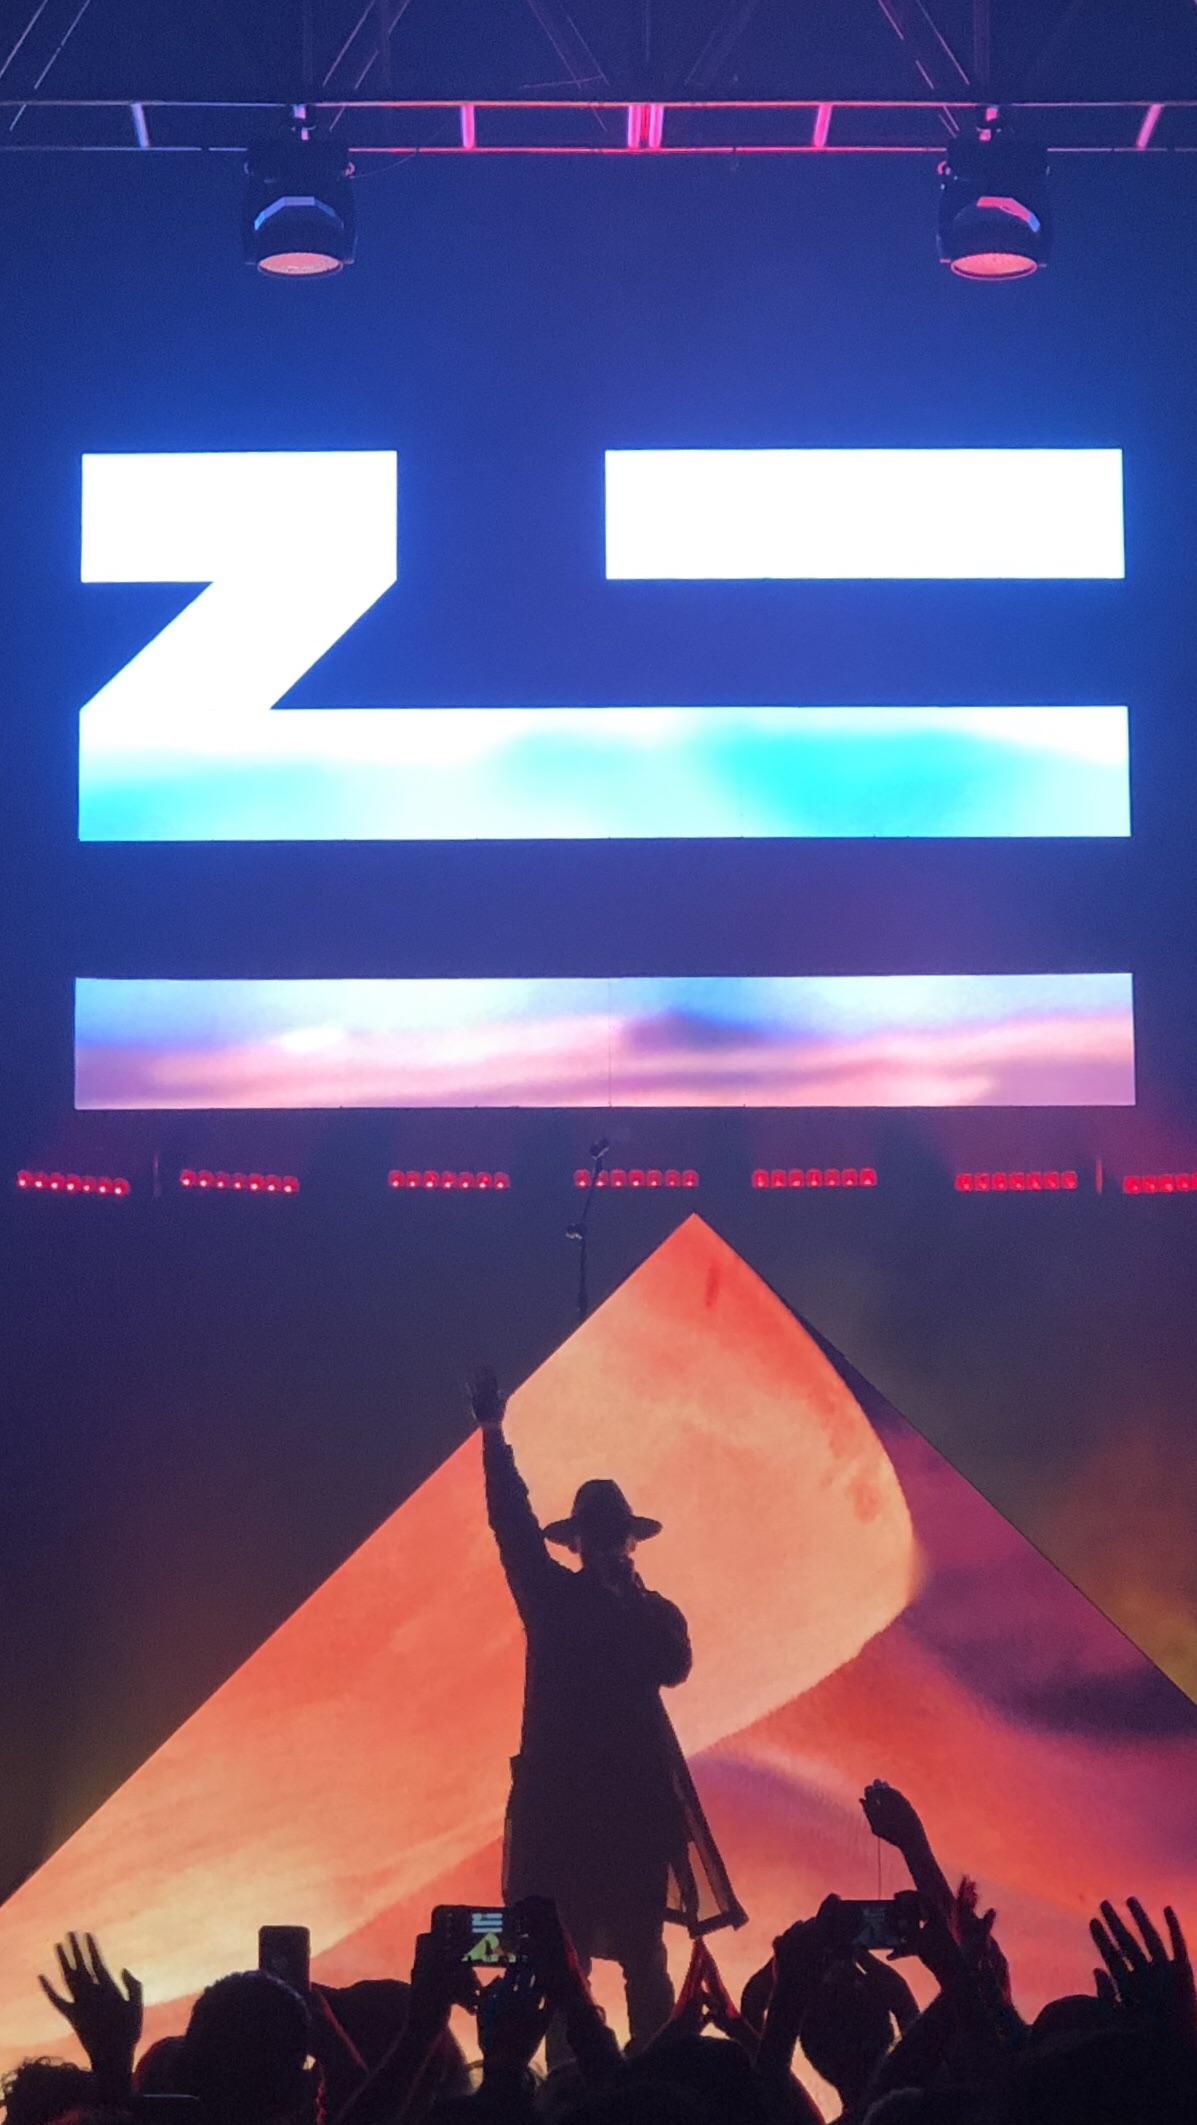 Made This My Phone Wallpaper Taken Off Philly Show Zhu